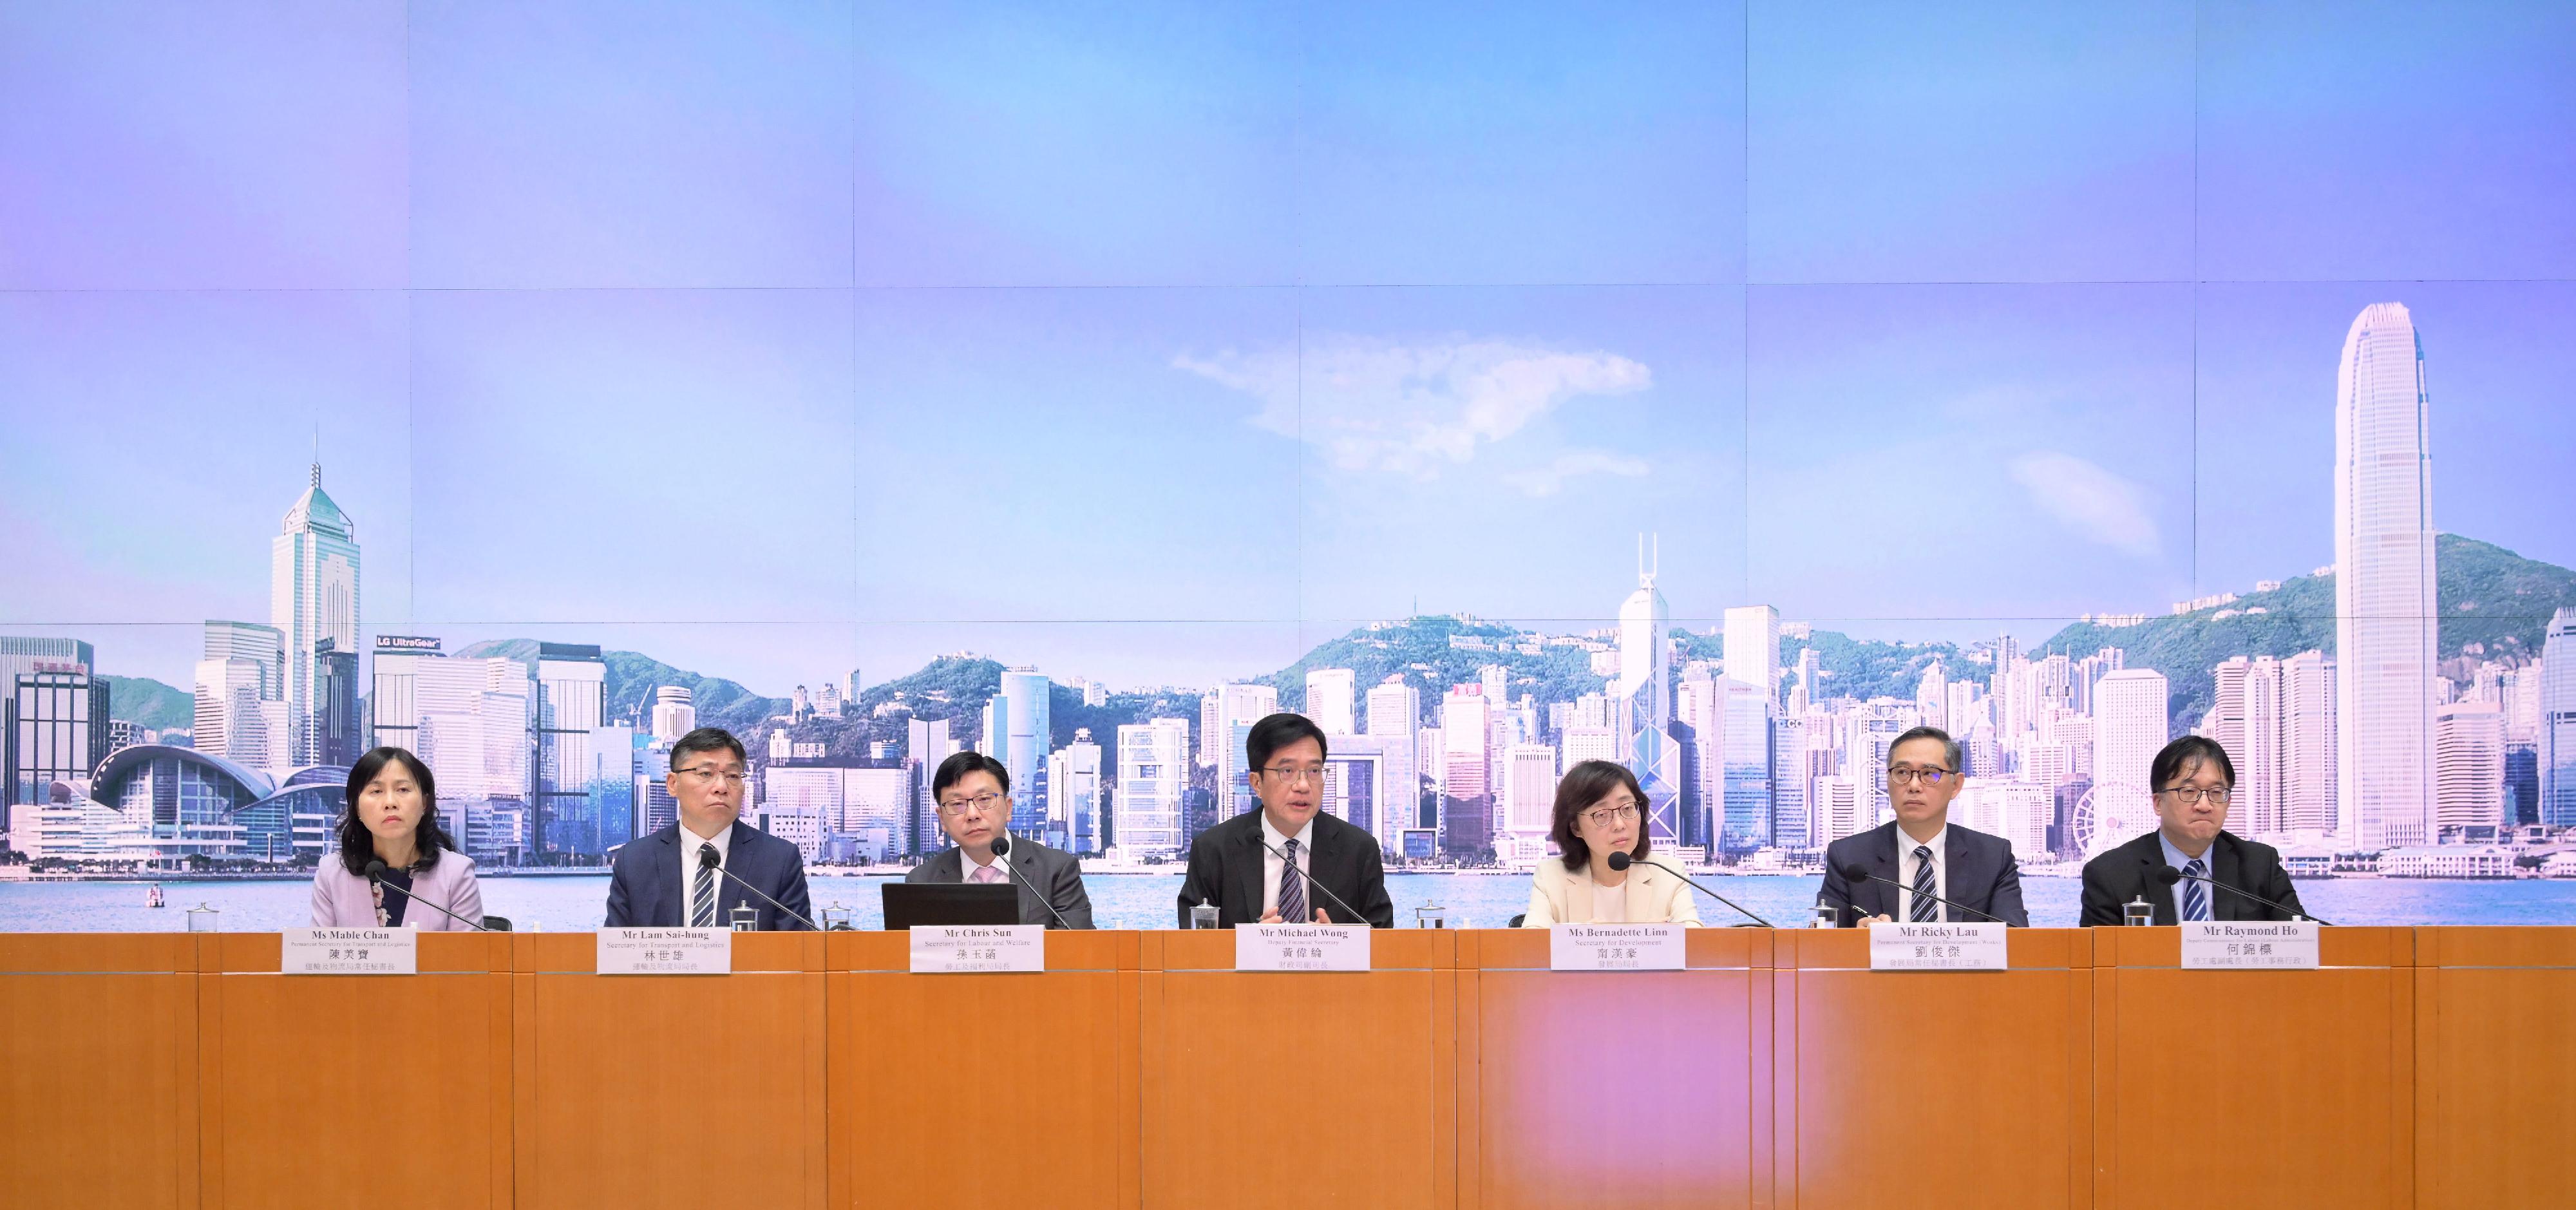 The Deputy Financial Secretary, Mr Michael Wong (centre), holds a press conference on the Government's measures on importation of labour with the Secretary for Transport and Logistics, Mr Lam Sai-hung (second left); the Secretary for Development, Ms Bernadette Linn (third right); the Secretary for Labour and Welfare, Mr Chris Sun (third left); the Permanent Secretary for Transport and Logistics, Ms Mable Chan (first left); the Permanent Secretary for Development (Works), Mr Ricky Lau (second right); and the Deputy Commissioner for Labour (Labour Administration), Mr Raymond Ho (first right), at the Central Government Offices, Tamar, this afternoon (June 13).